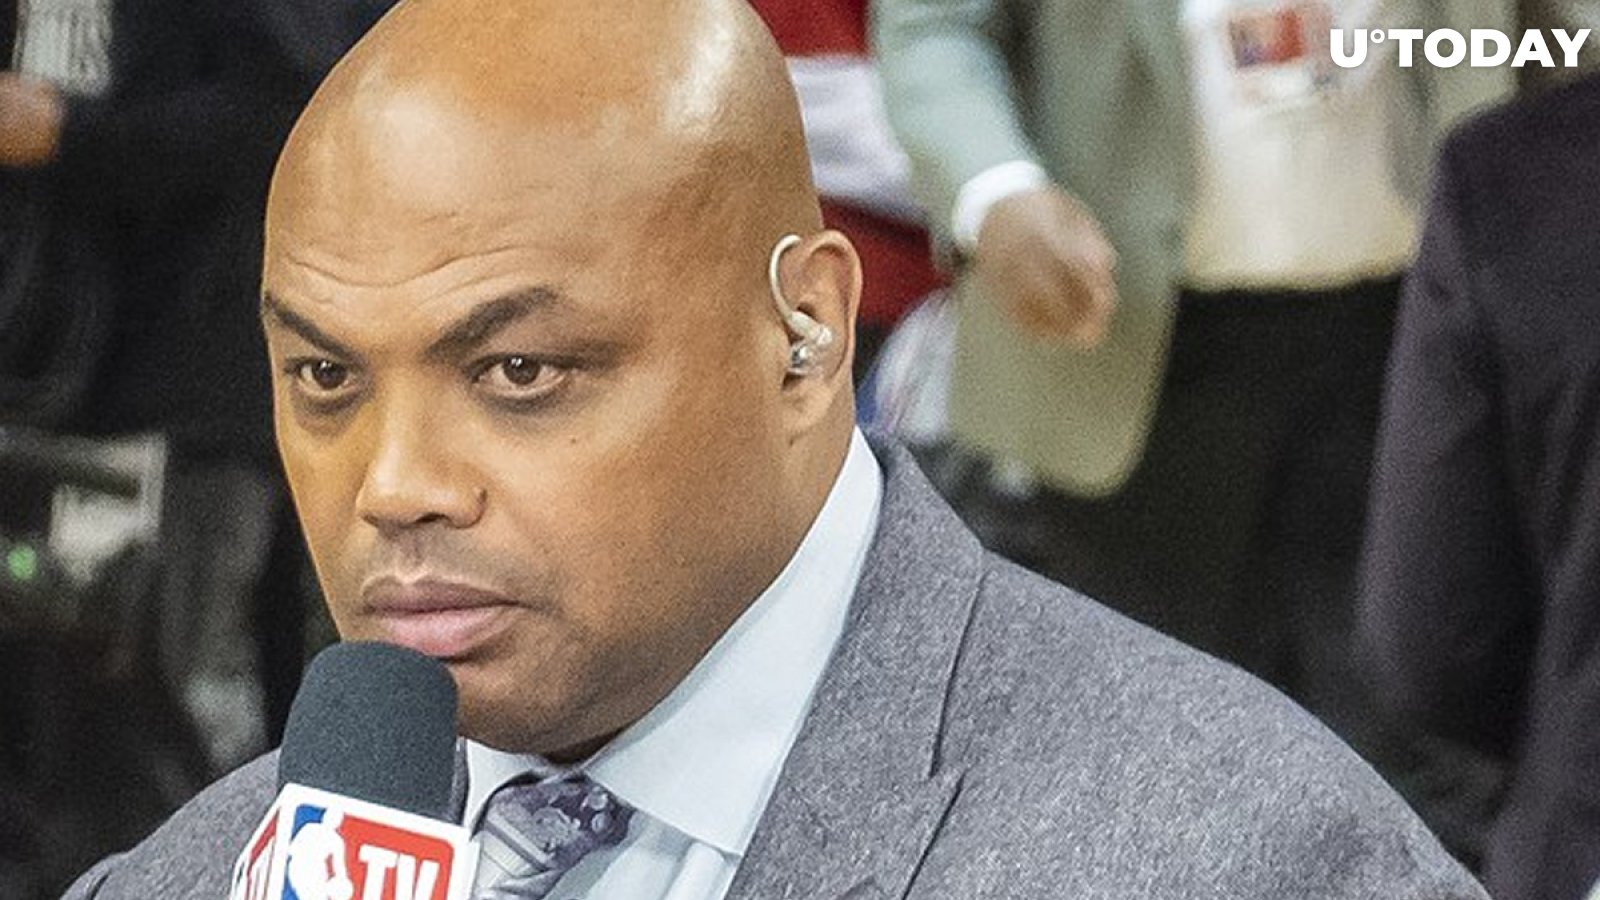 NBA Star Charles Barkley Is Not Advised to Invest in Cryptocurrency